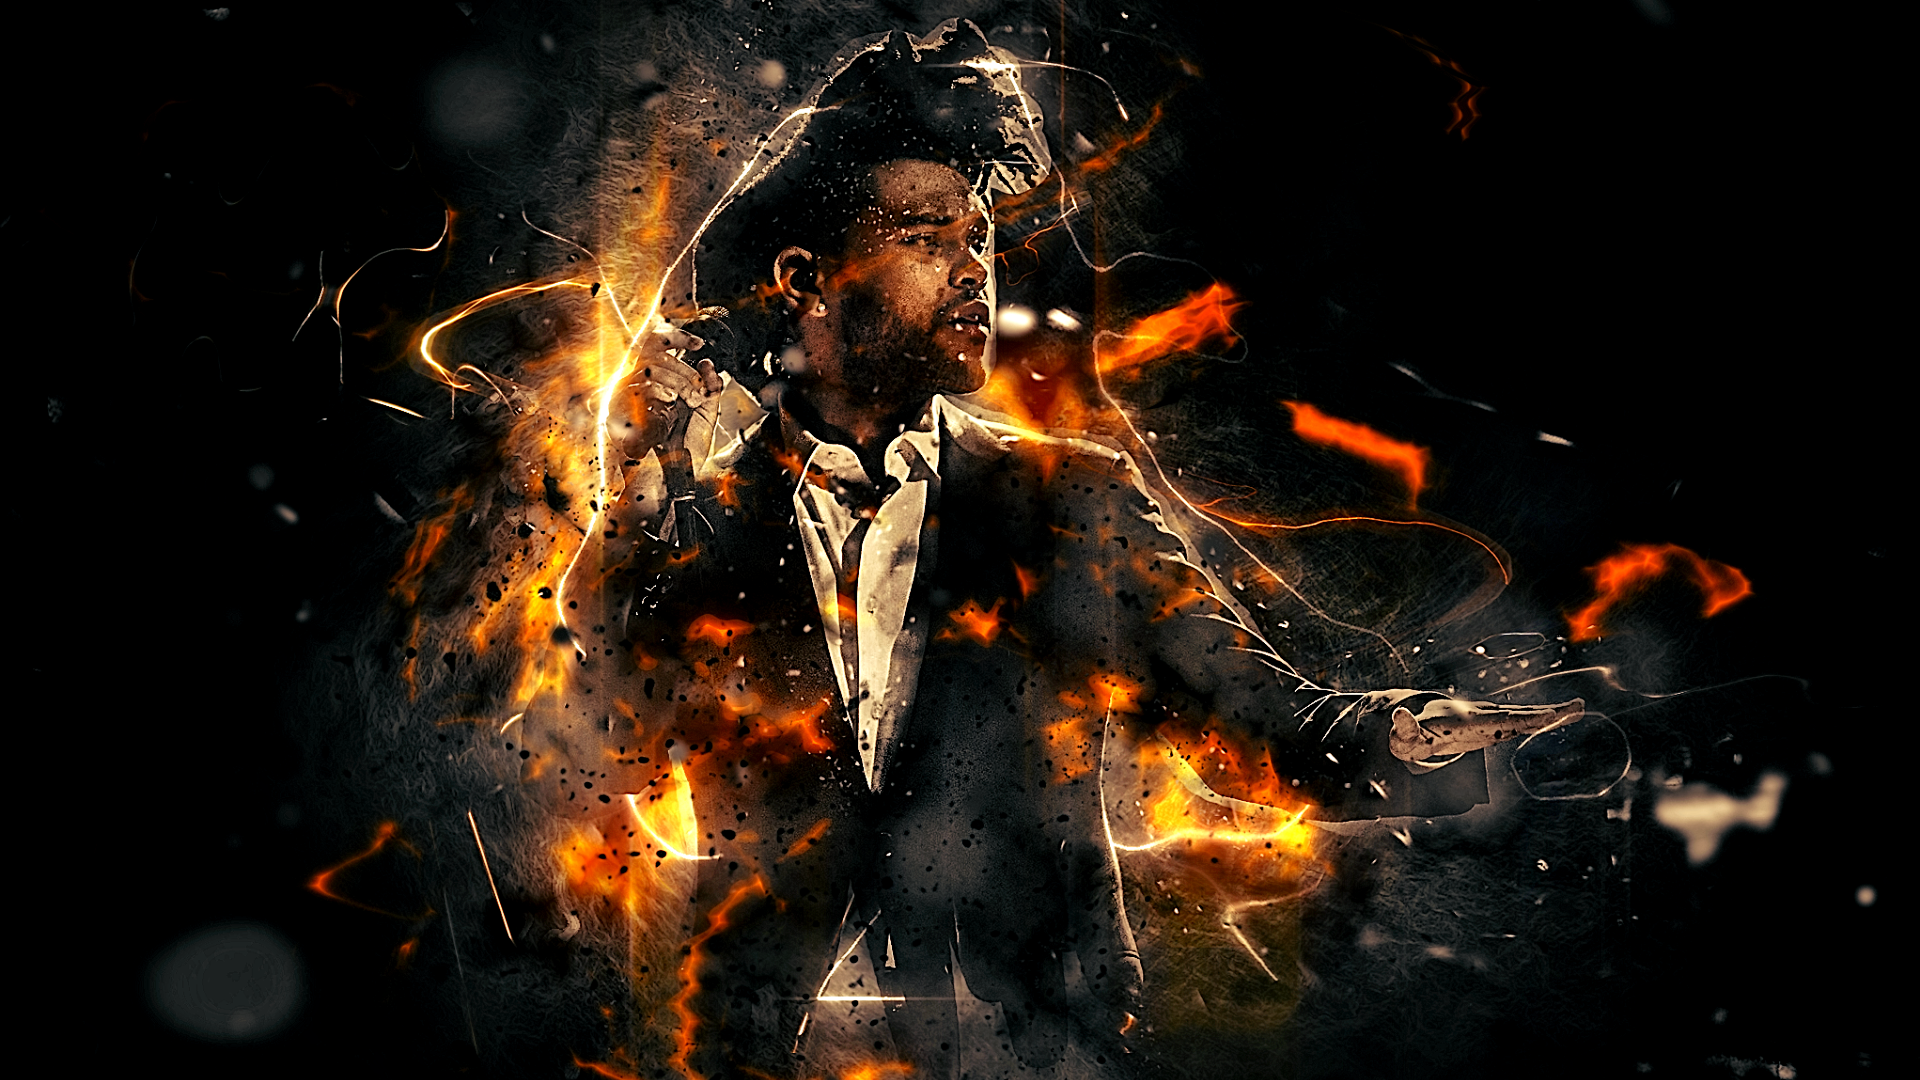 The Weeknd at the Juno Awards / FURY effect - The Weeknd Wallpaper ...